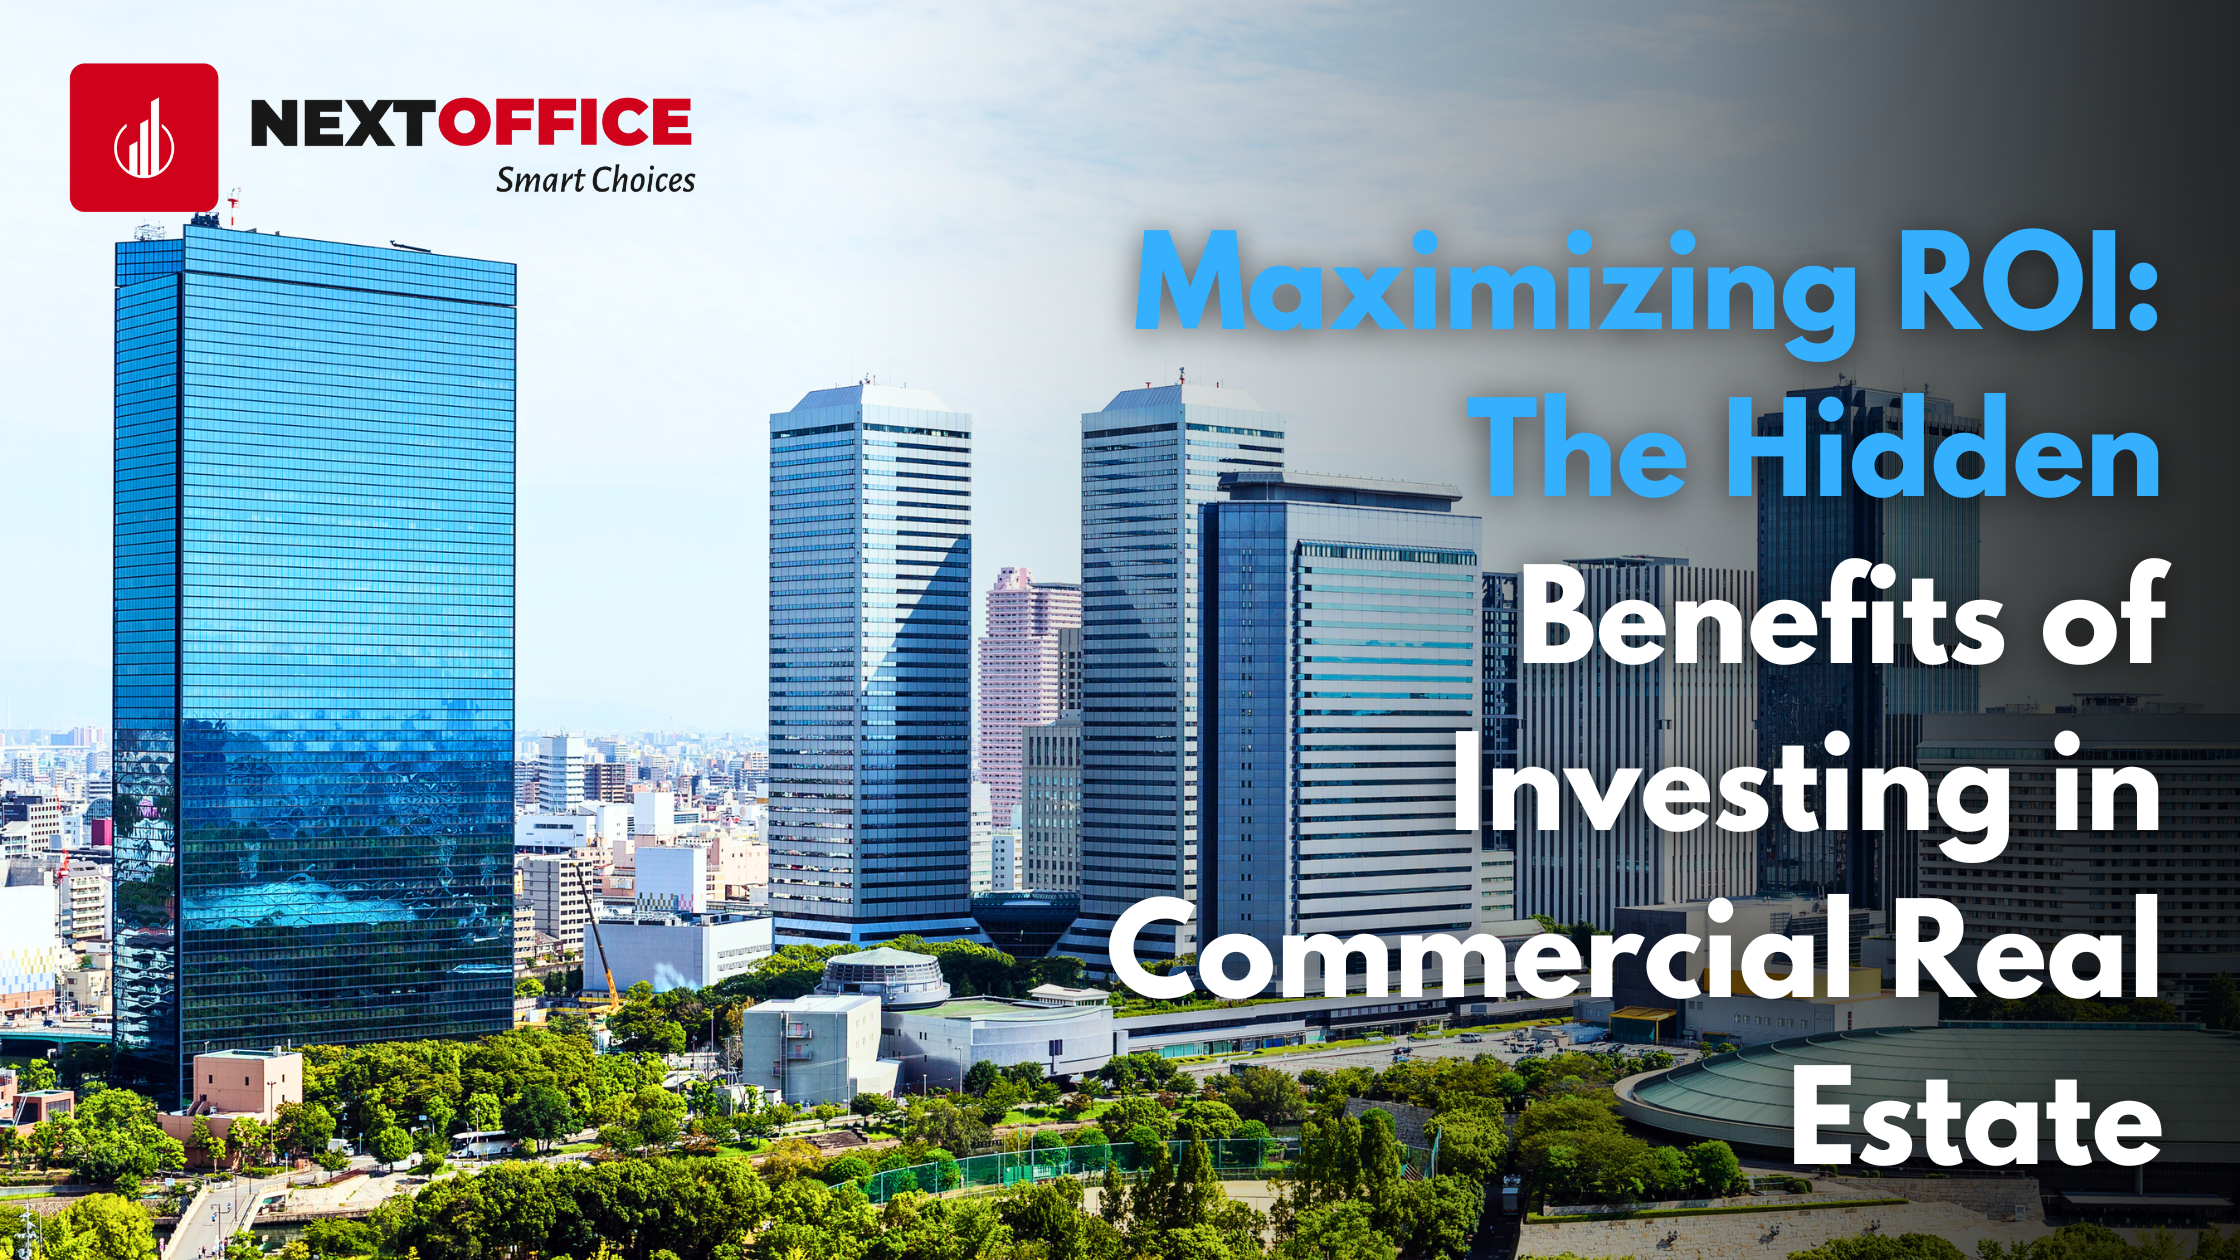 Maximizing ROI: The Hidden Benefits of Investing in Commercial Real Estate